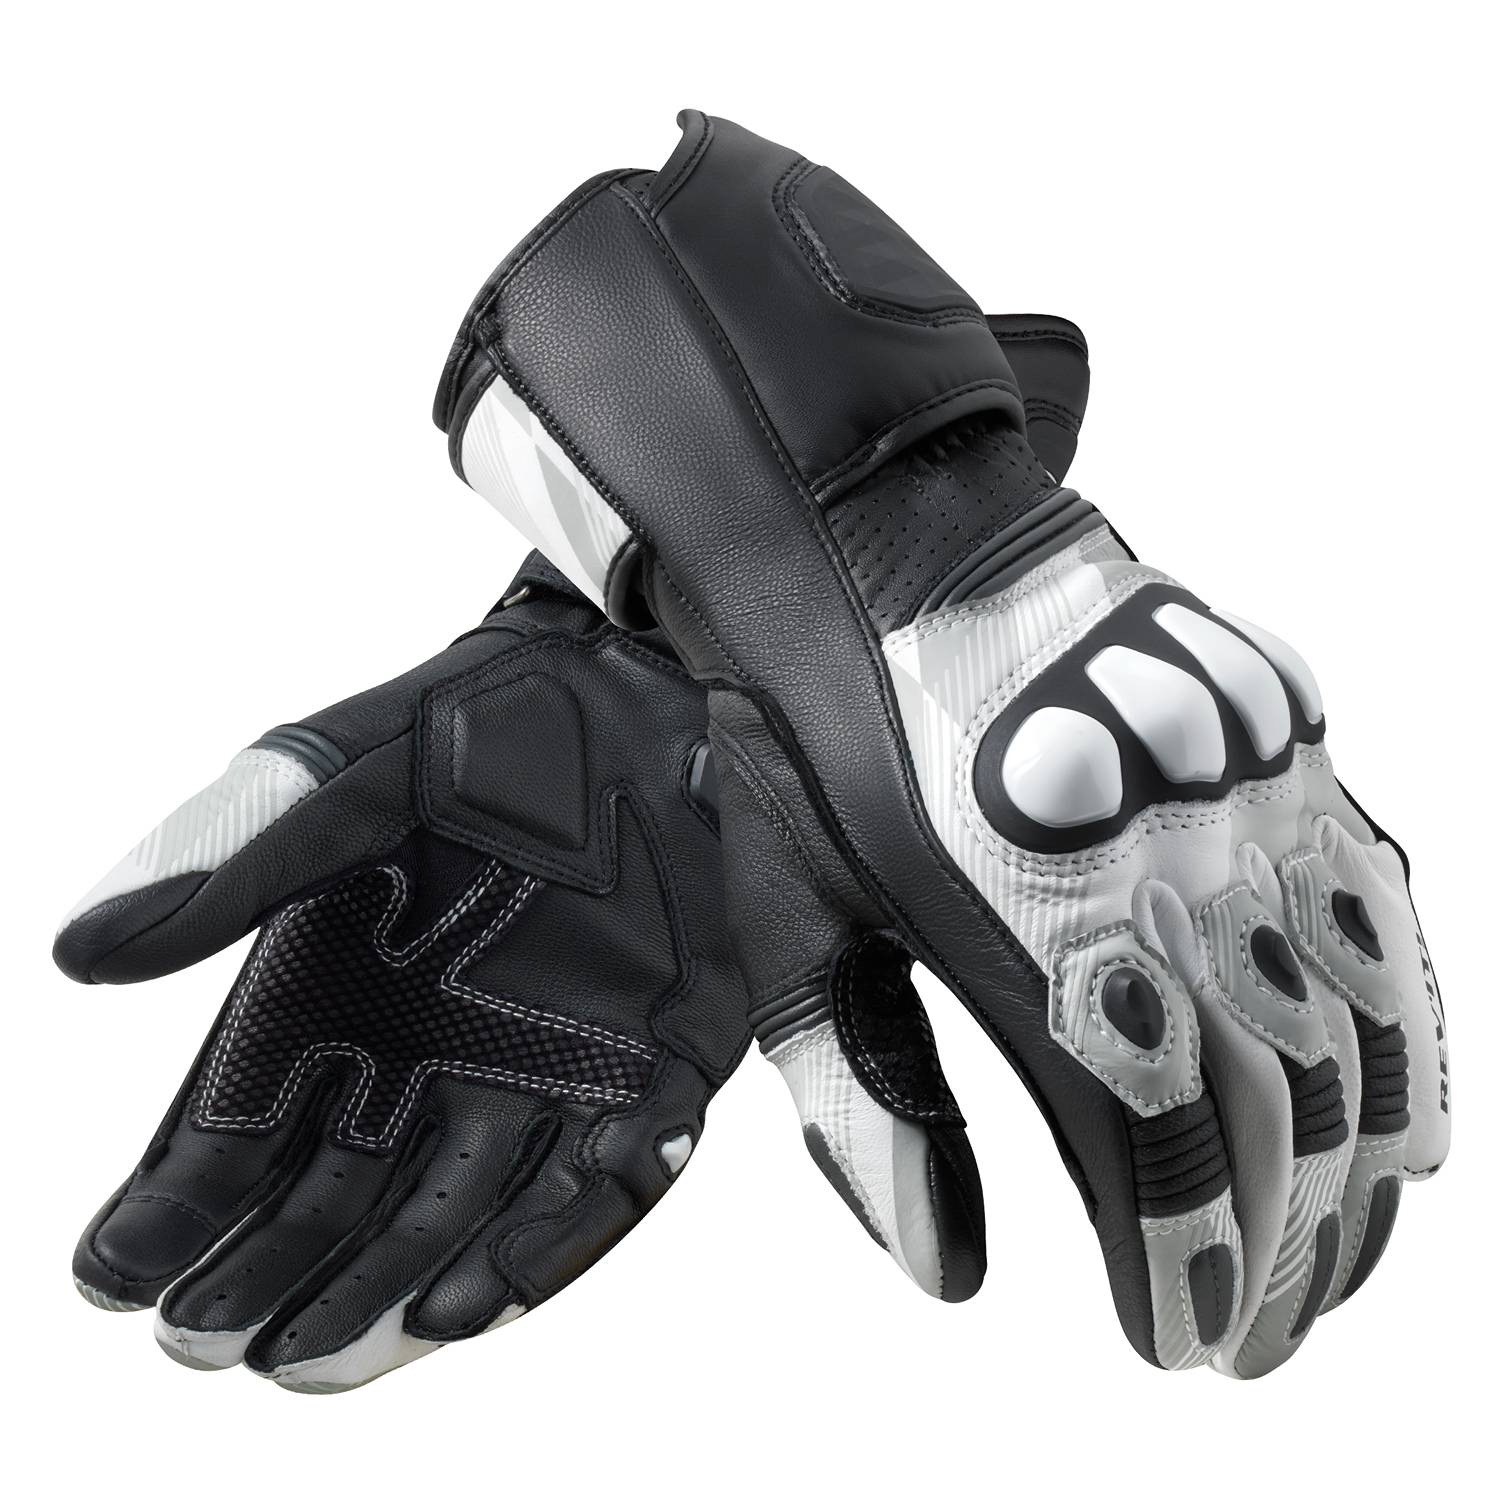 Image of REV'IT! League 2 Gloves Black Grey Size S ID 8700001360661